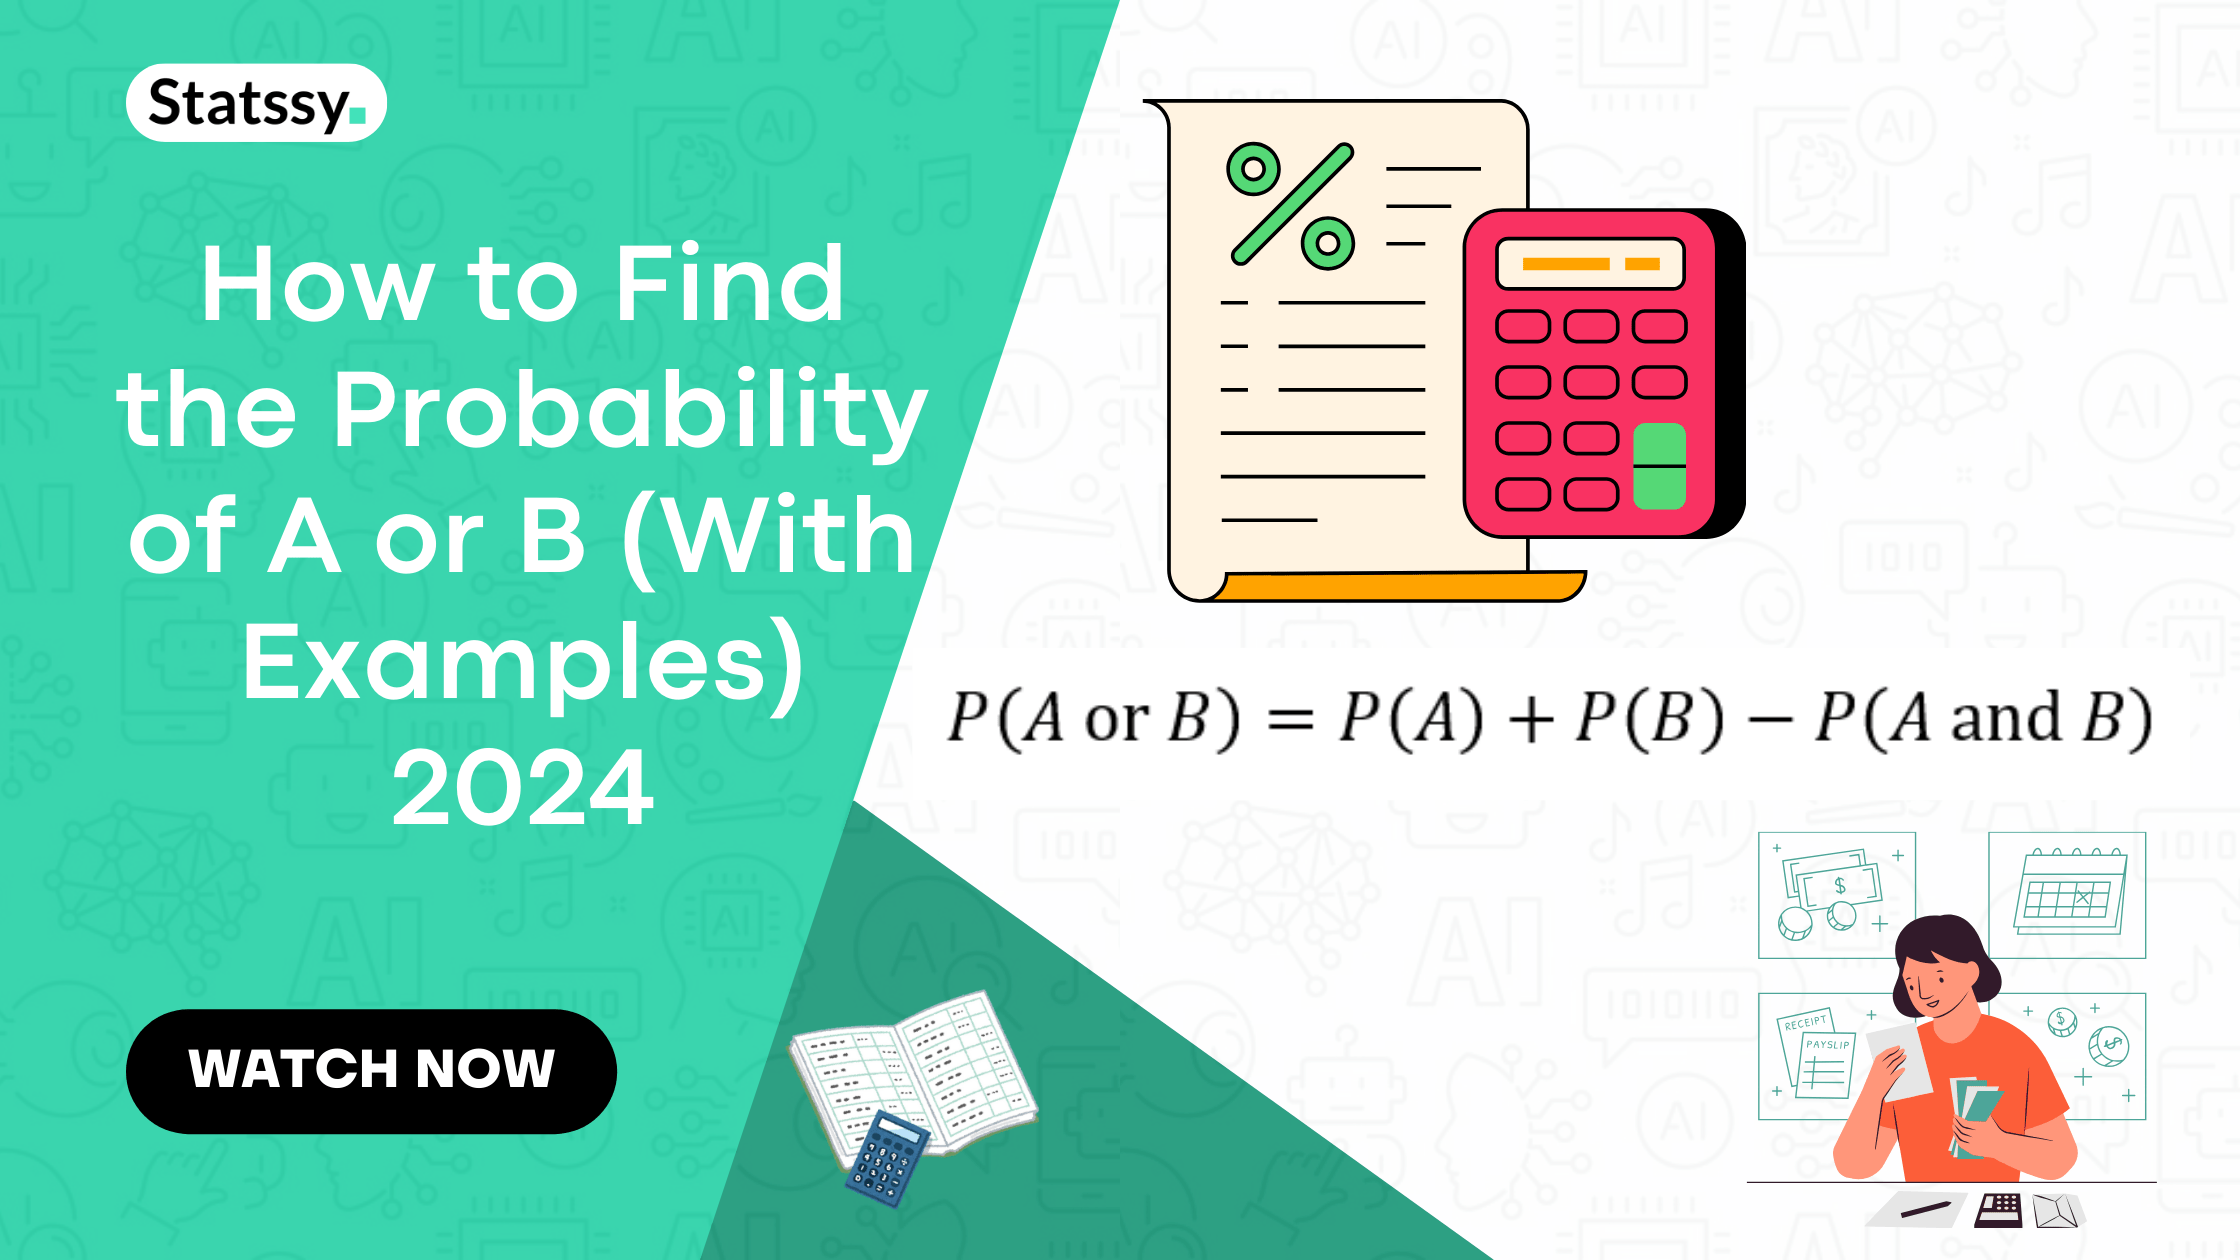 How to Find the Probability of A or B (With Examples) 2024